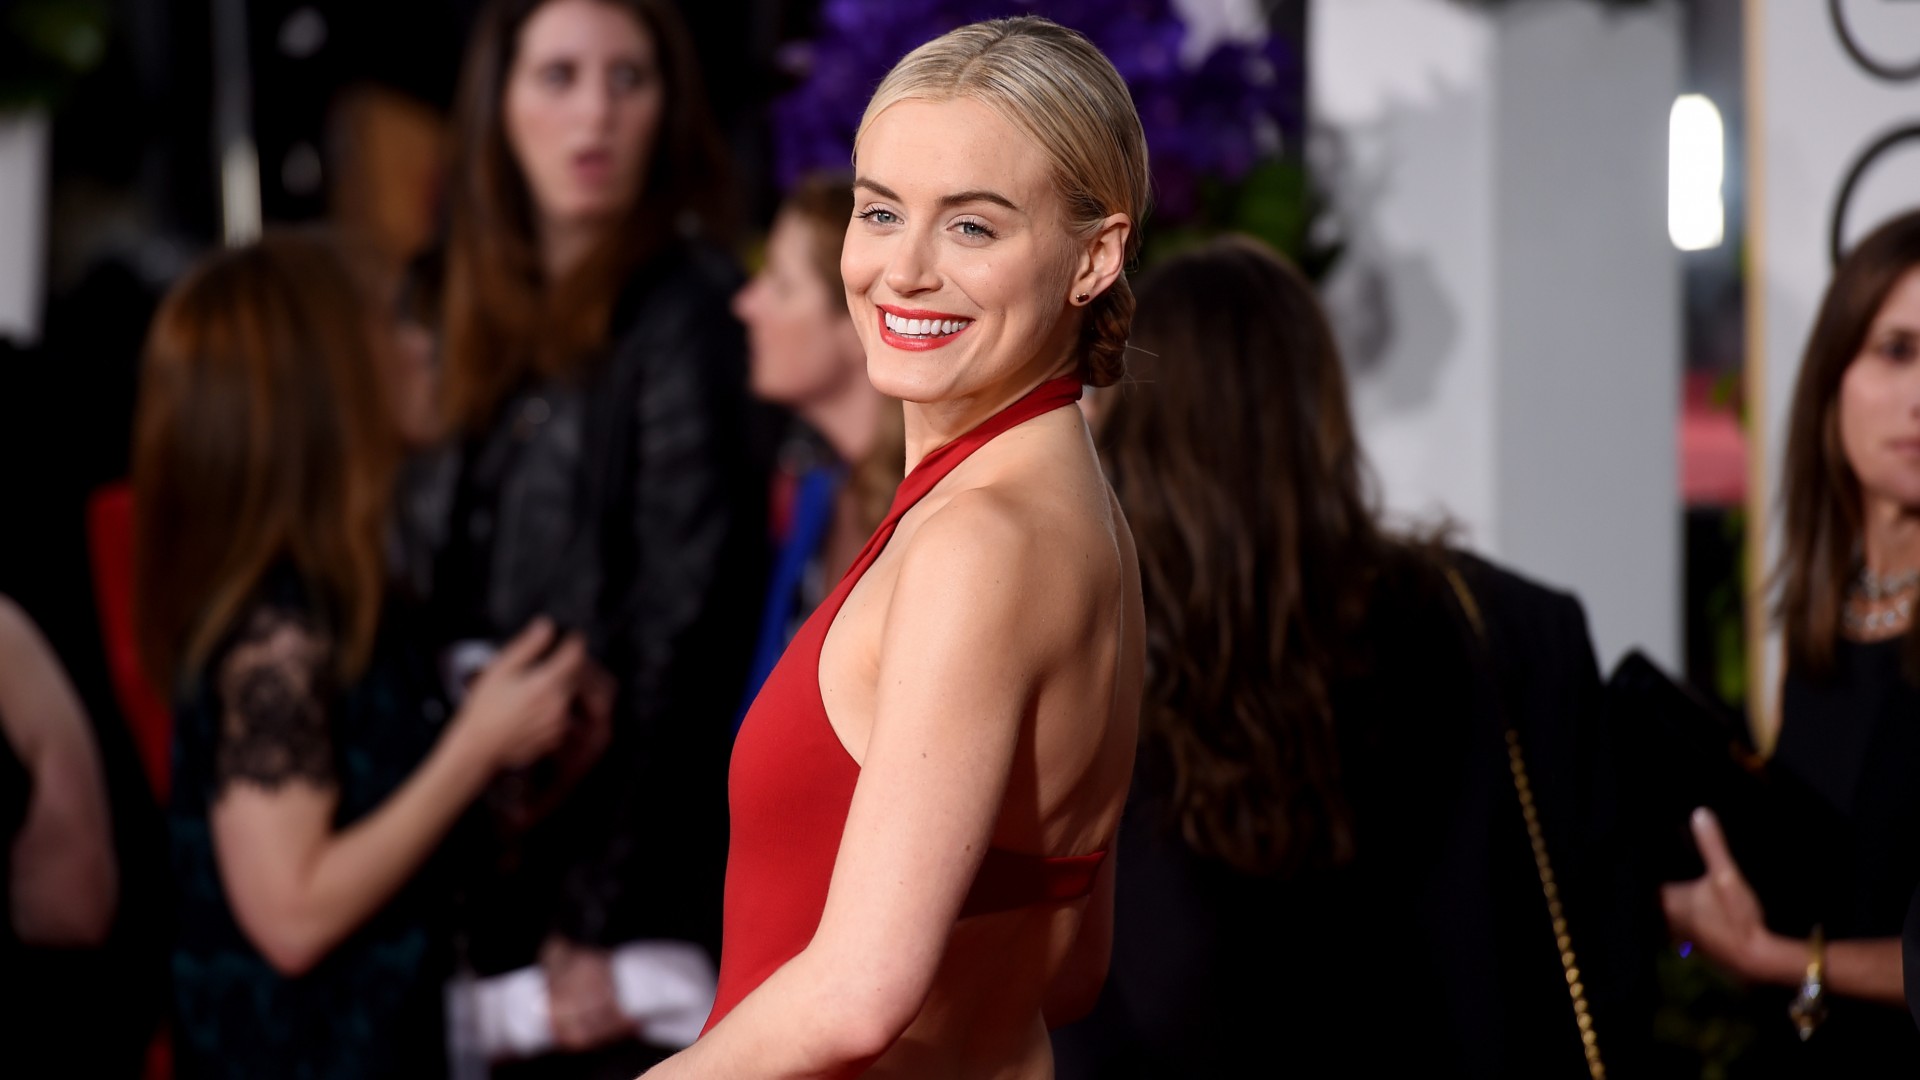 Taylor Schilling, Most Popular Celebs in 2015, actress, Orange Is the New Black (horizontal)